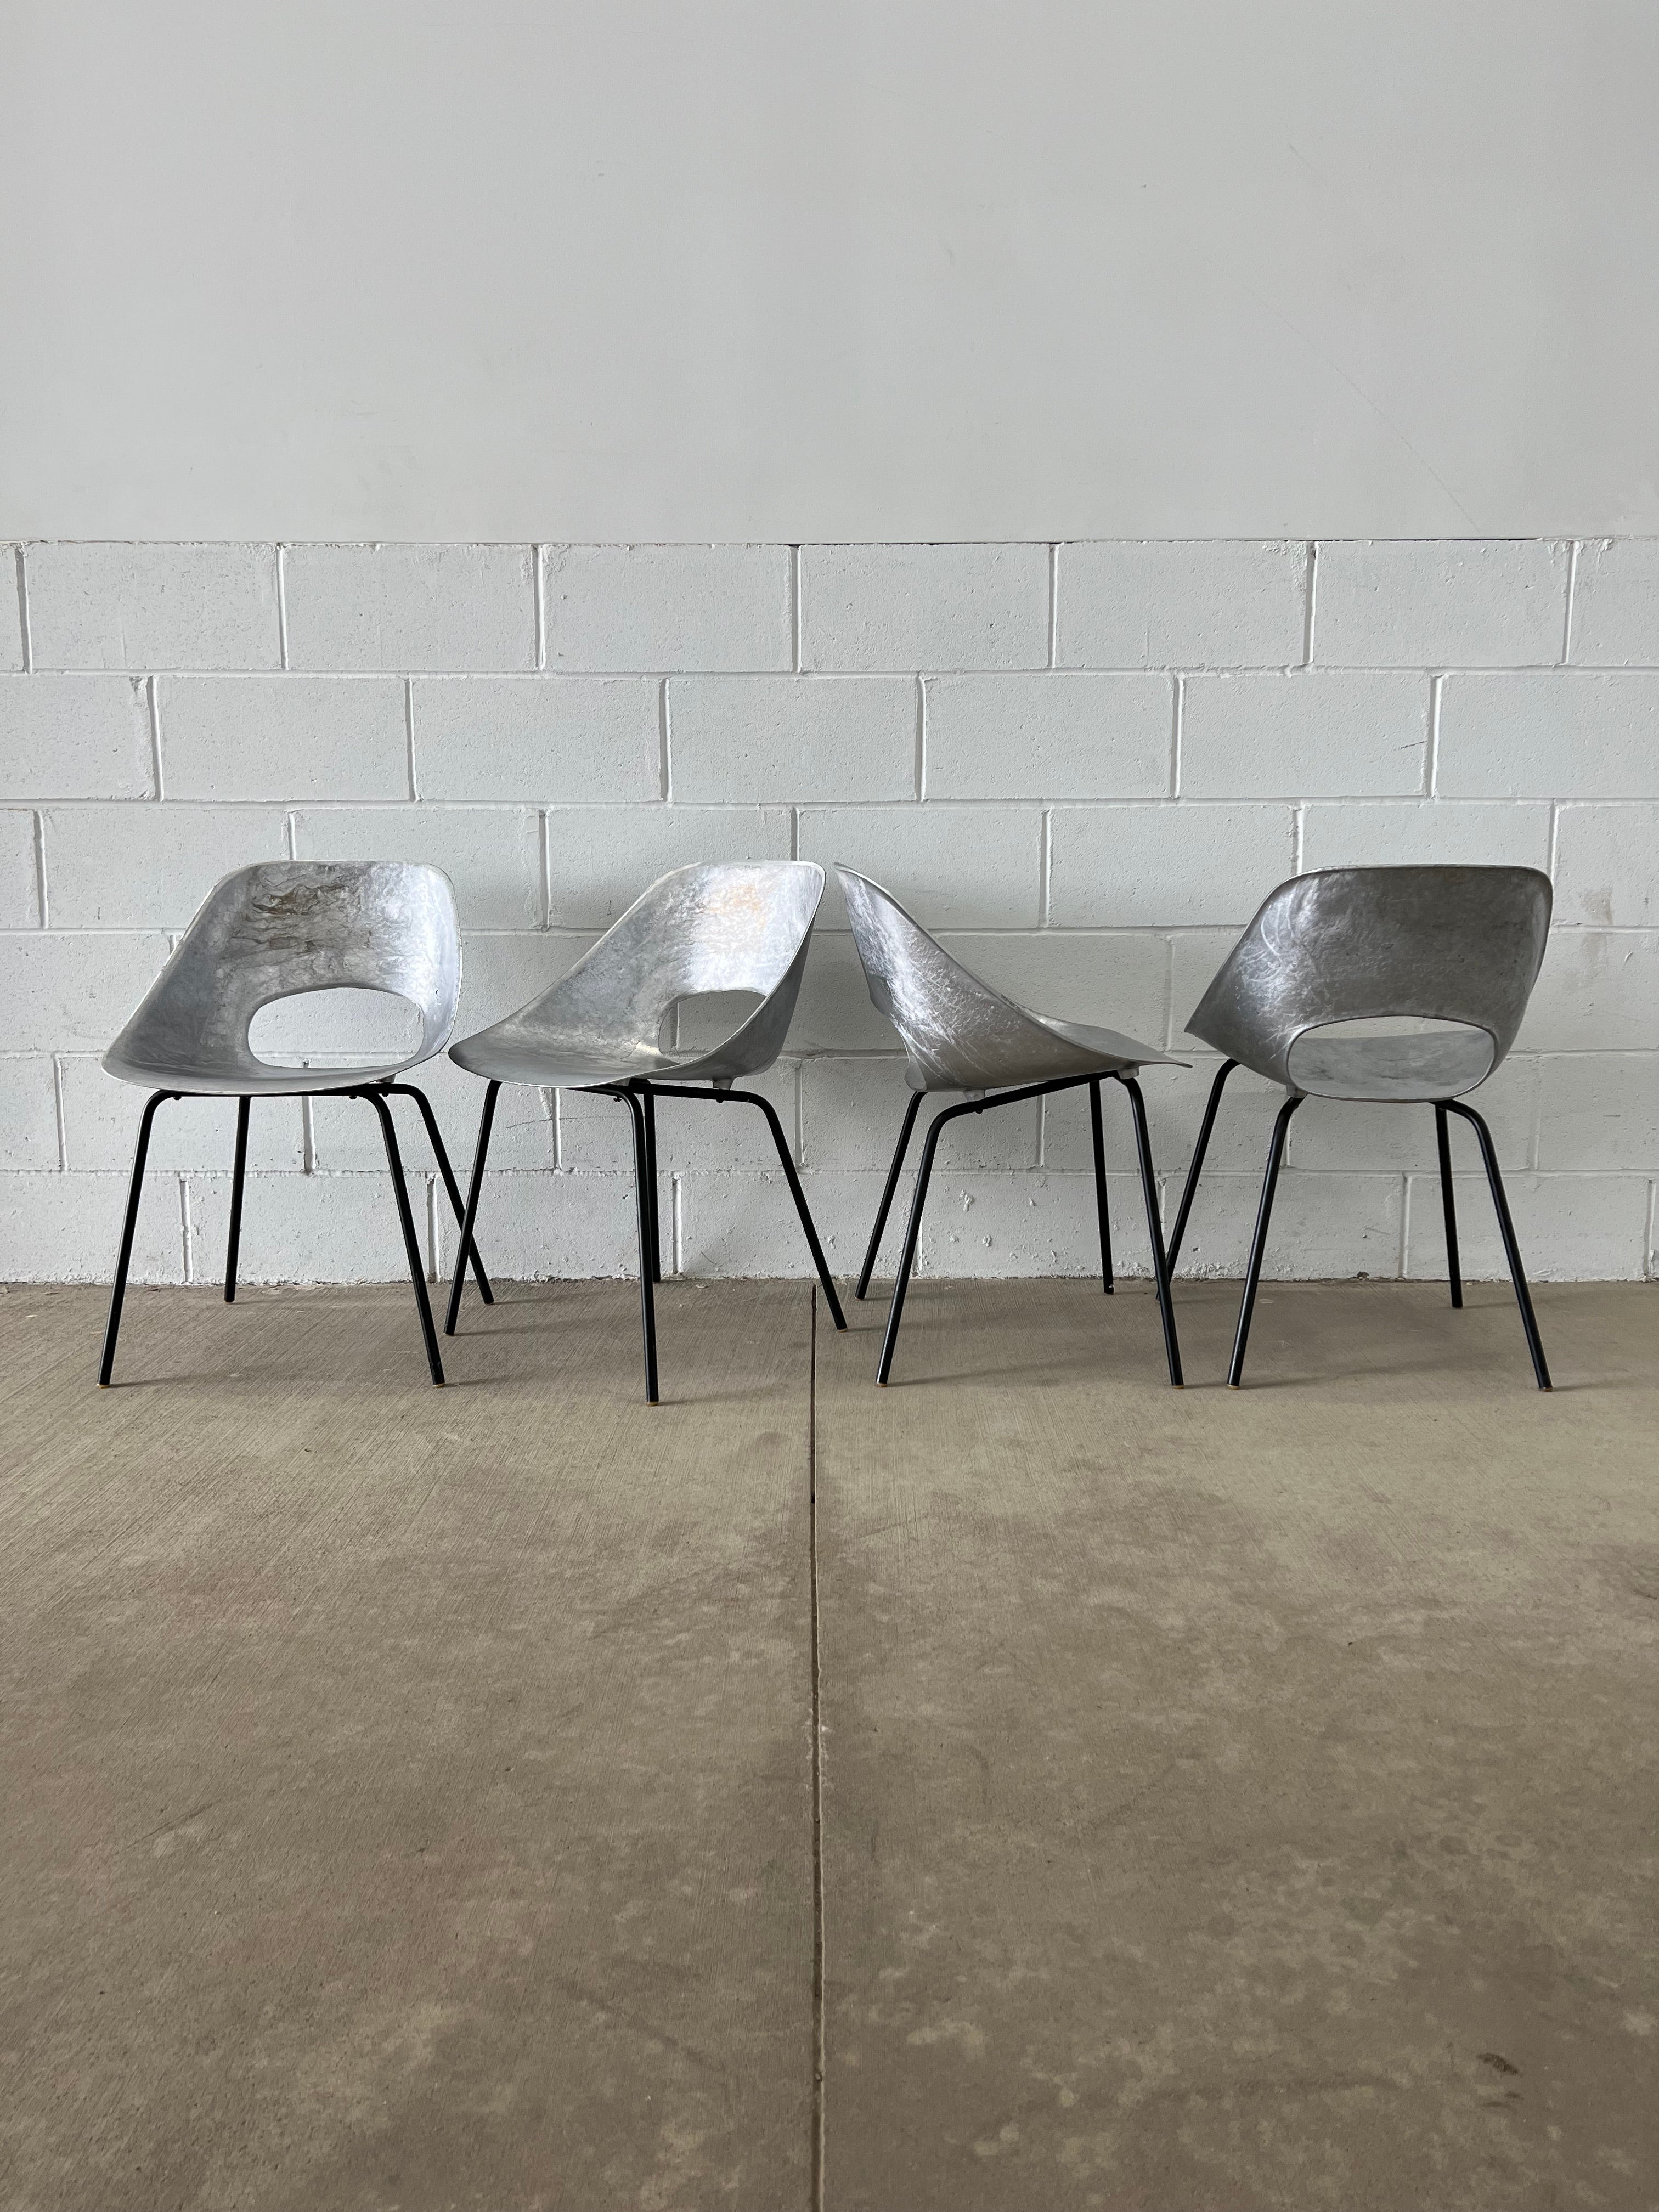 A standard of French design, the Tulipe chair by Pierre Guariche has been a rising star and is approaching the desirability of his contemporaries' designs. 

These chairs are in raw cast aluminum. All hardware, feet, and bases are original.